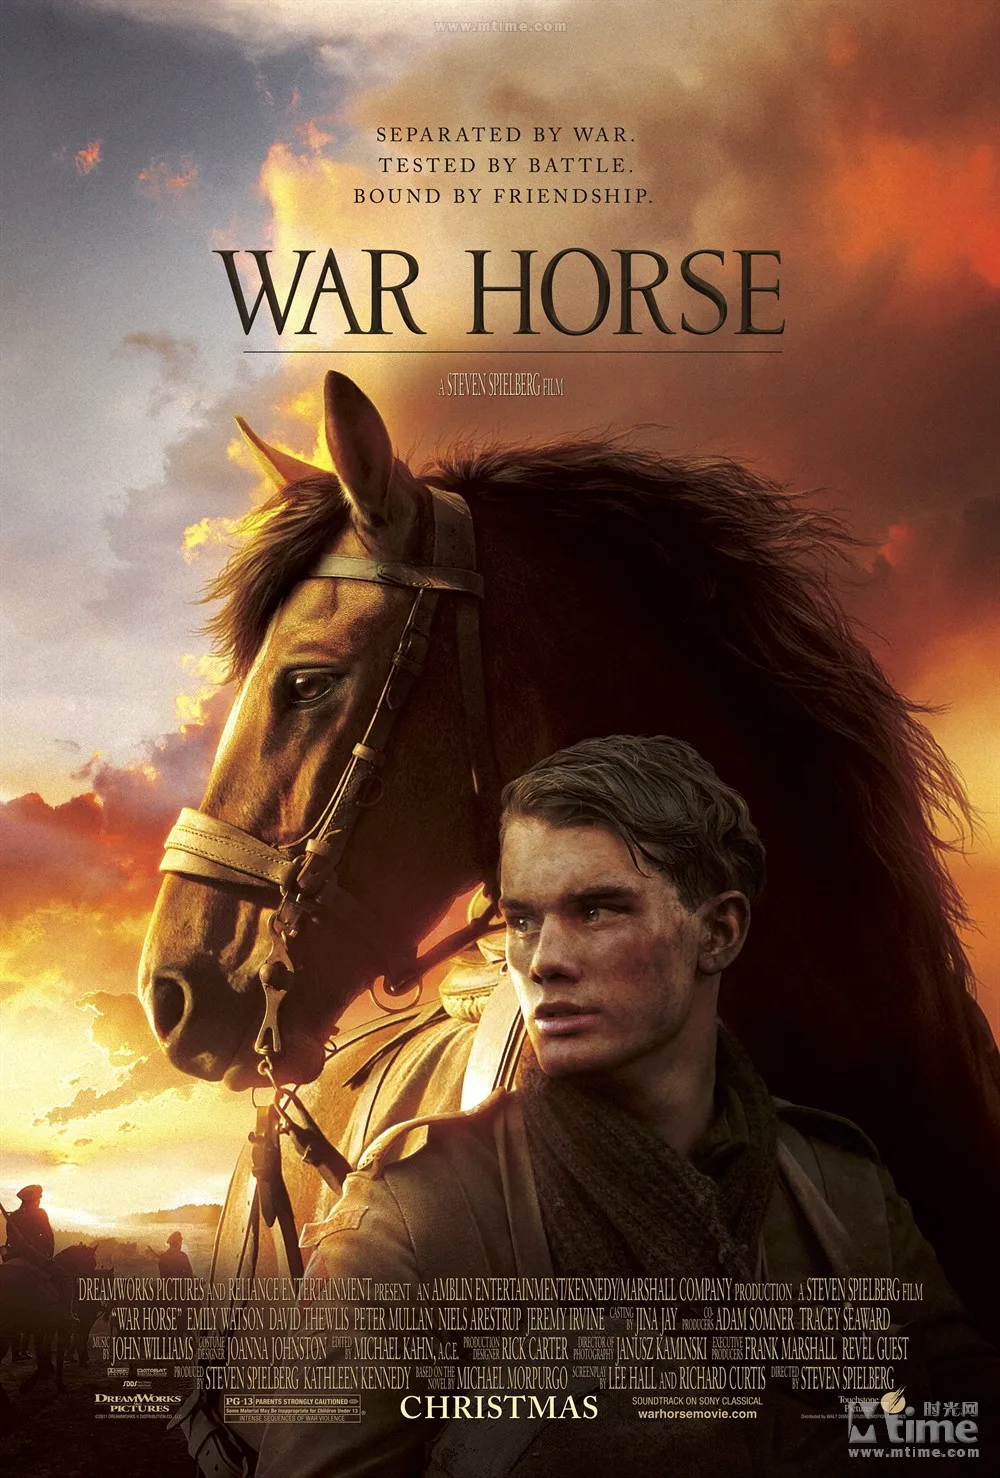 

2011 Movie War Horse oil paintings canvas Prints Wall Art For Living Room Bedroom Decor